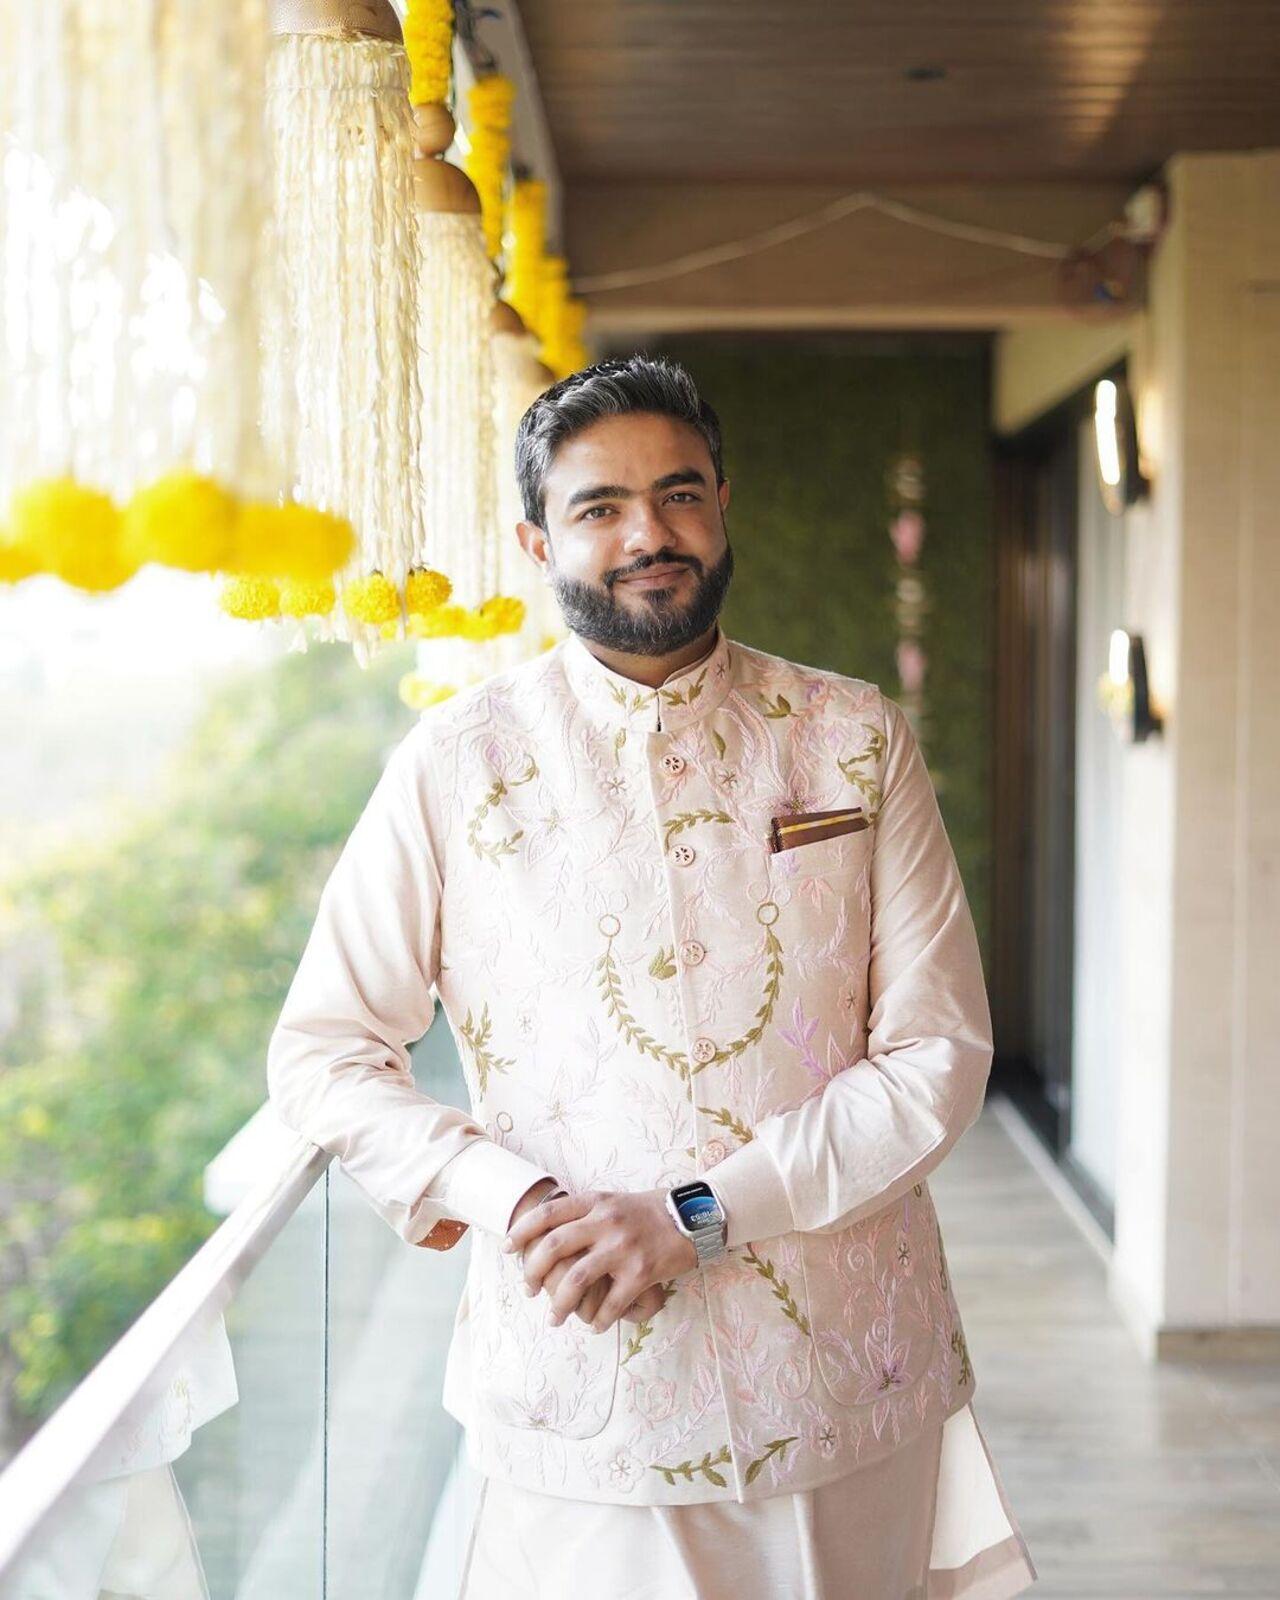 Siddharth Chopra opted for a stunning light peach coloured sherwani which featured green patterns on it